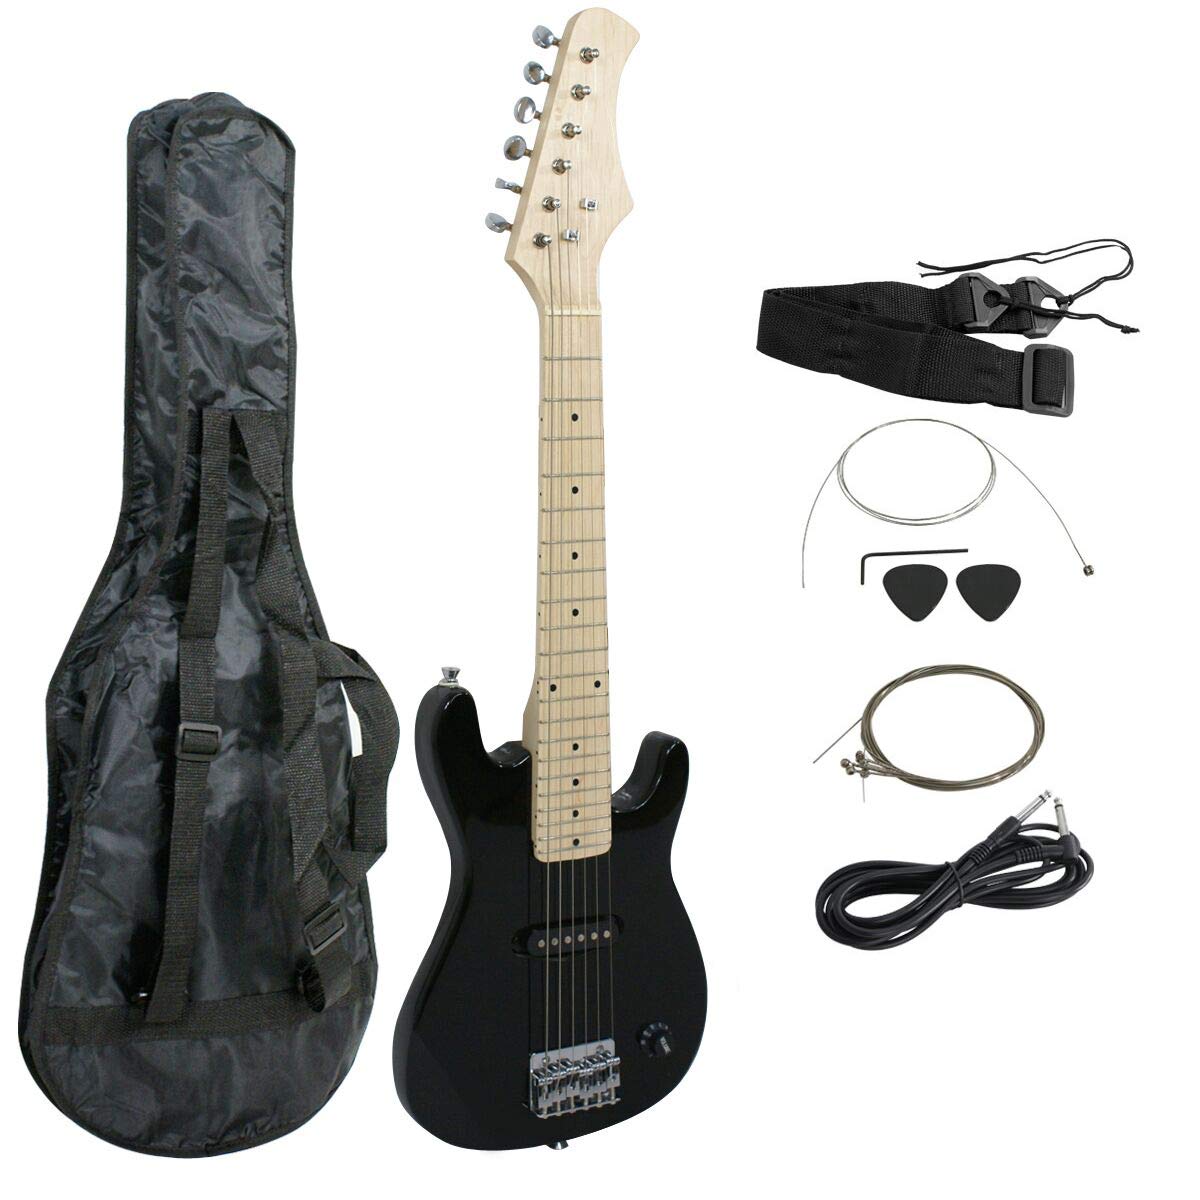 Smartxchoices 30" Kids Mini Electric Guitar Bass Guitar Bundle Kit for Beginners Starter with Gig Bag,Cable,Strap,Picks Combo Accessory Holiday Gift 